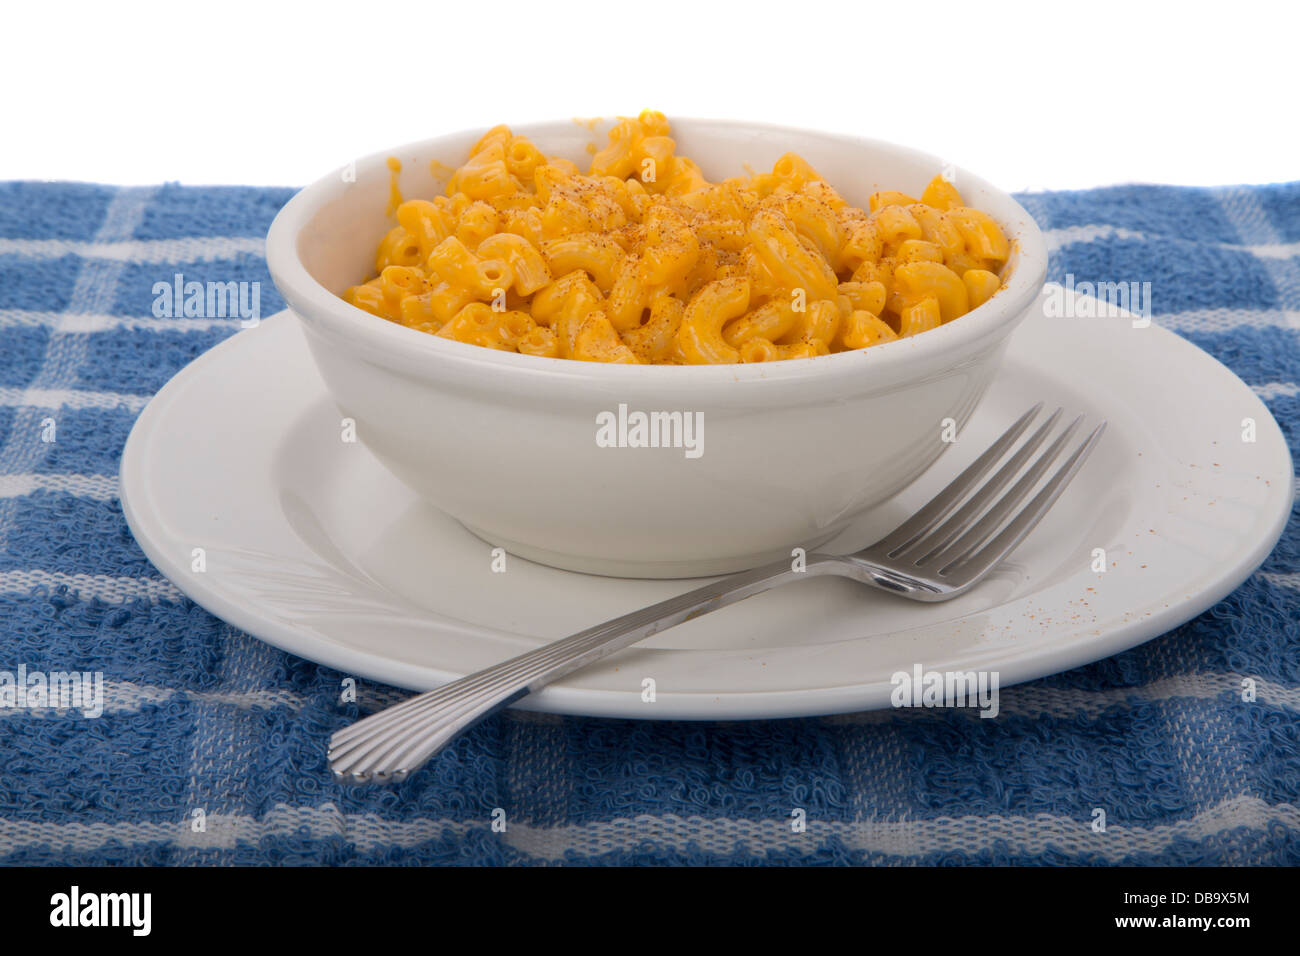 Macaroni and Cheese made from packaged mix in white bowl on a blue placemat Stock Photo